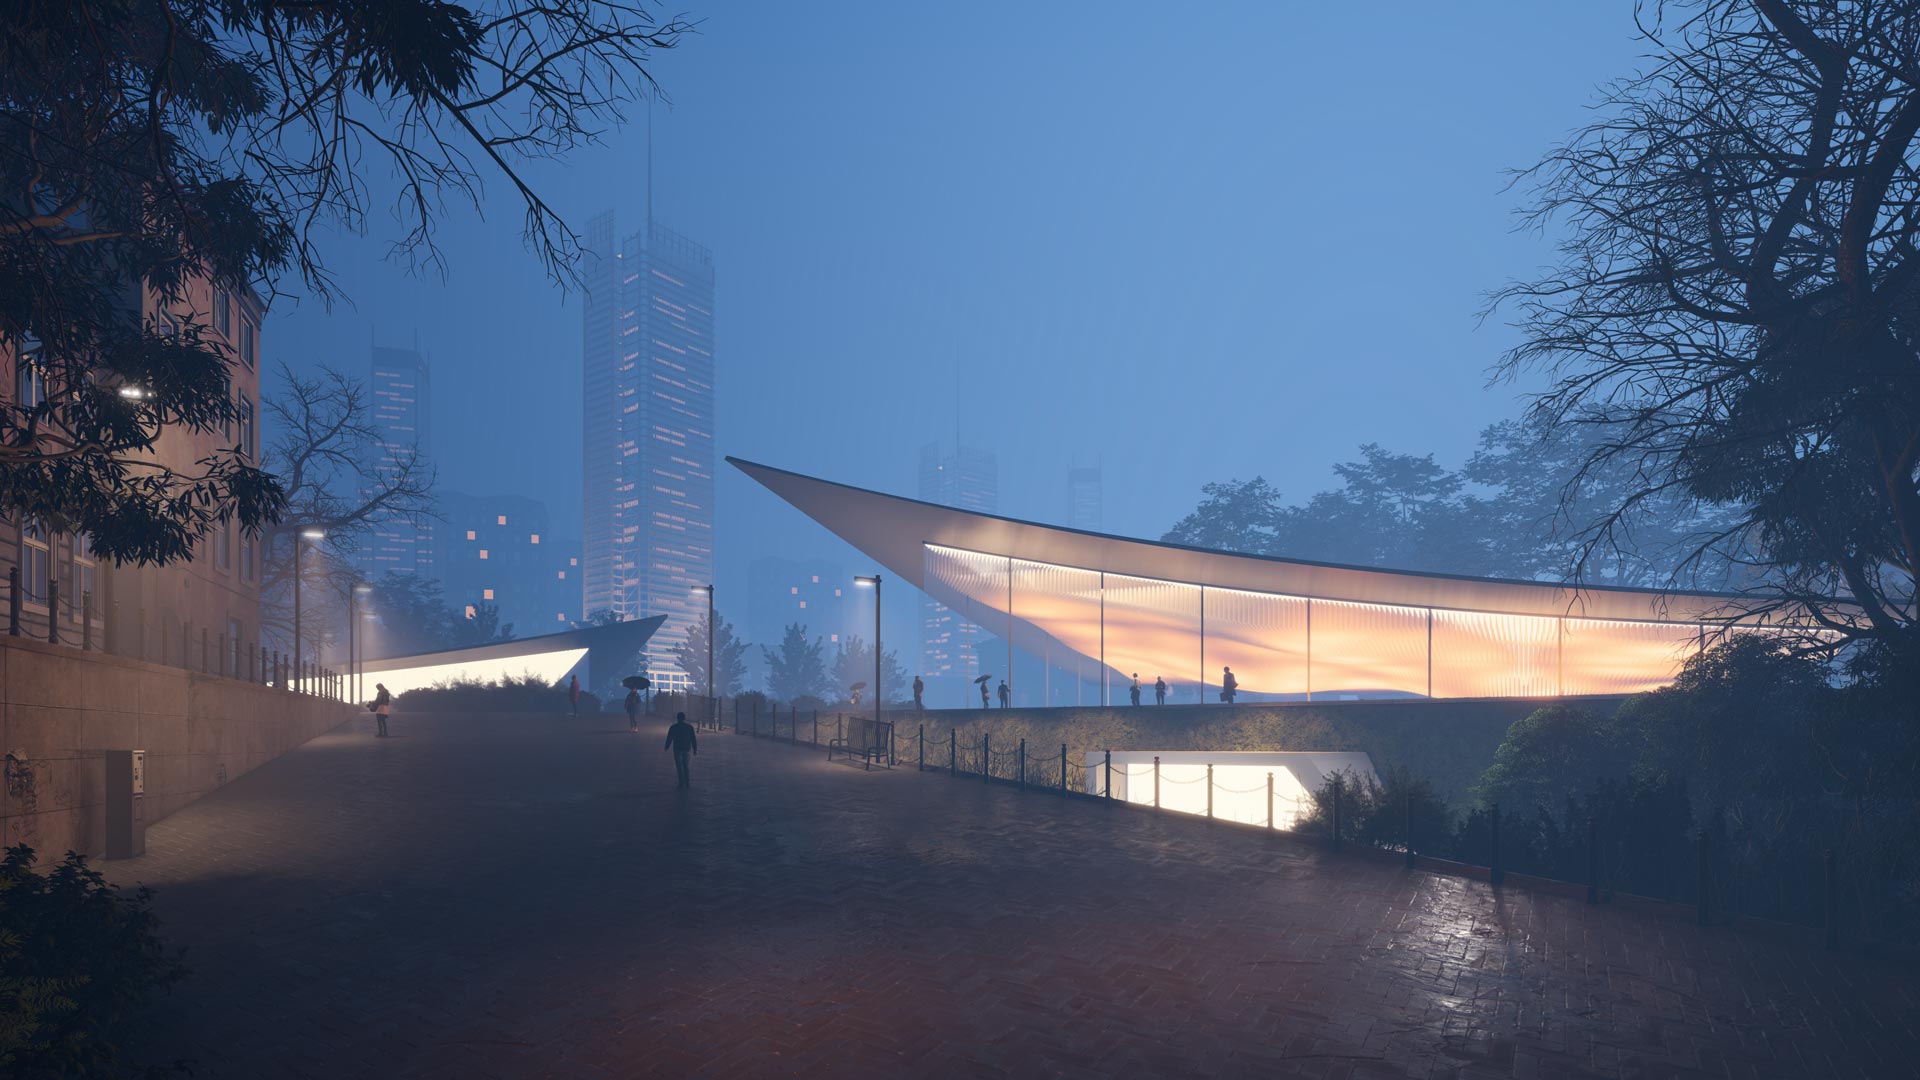 images/site/producten/Lumion/Lumion2023/rendering-fog-scene.jpg#joomlaImage://local-images/site/producten/Lumion/Lumion2023/rendering-fog-scene.jpg?width=1920&height=1080